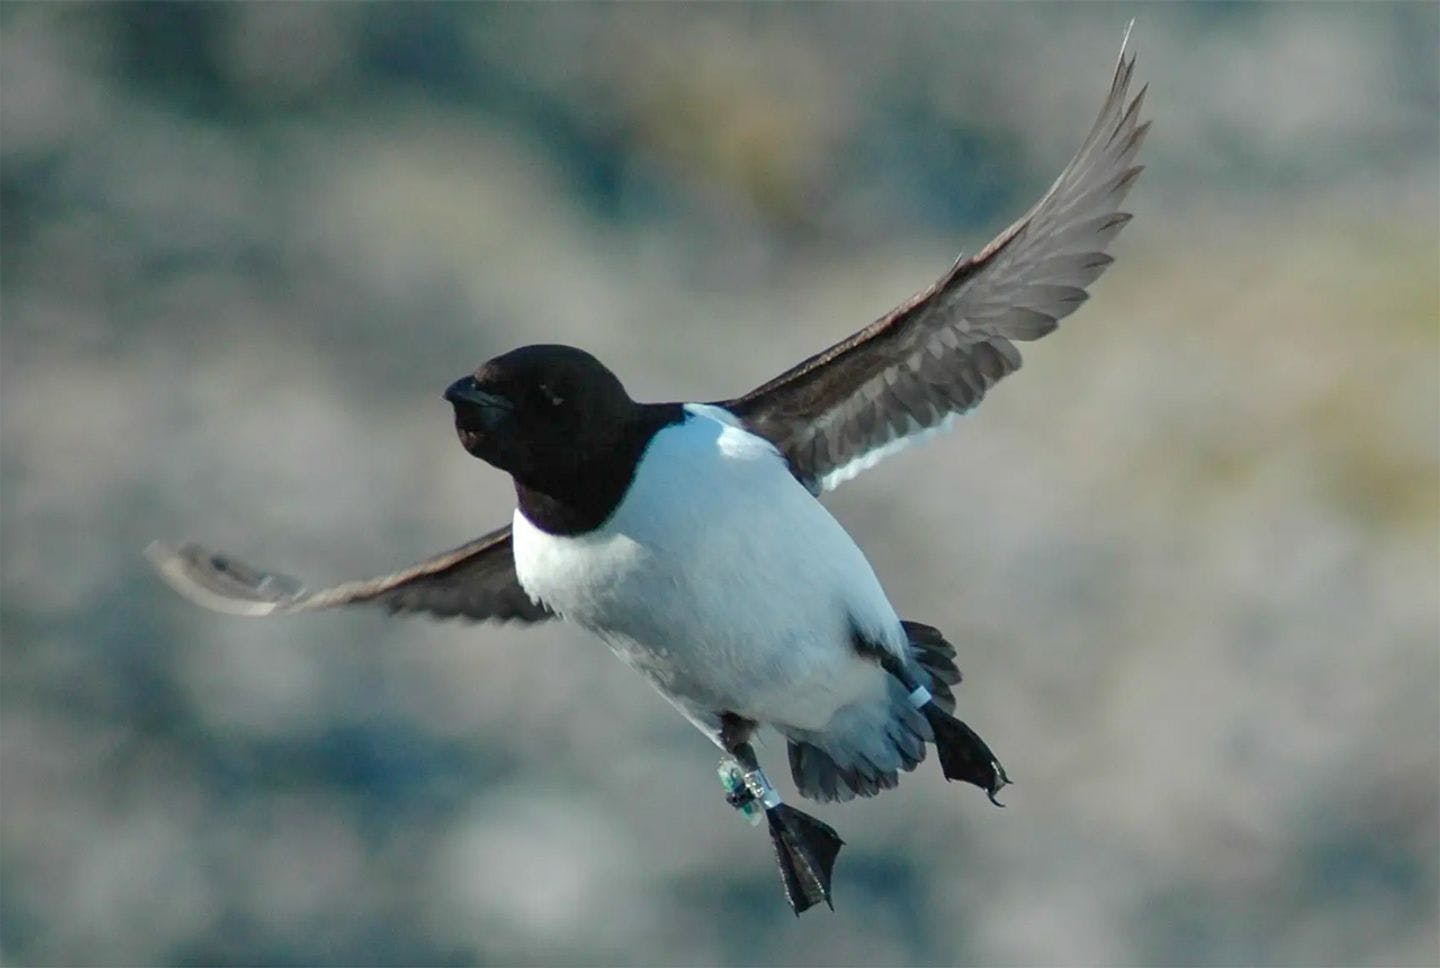 This little auk has a capsule on its right foot. Photo: Jerome Fort